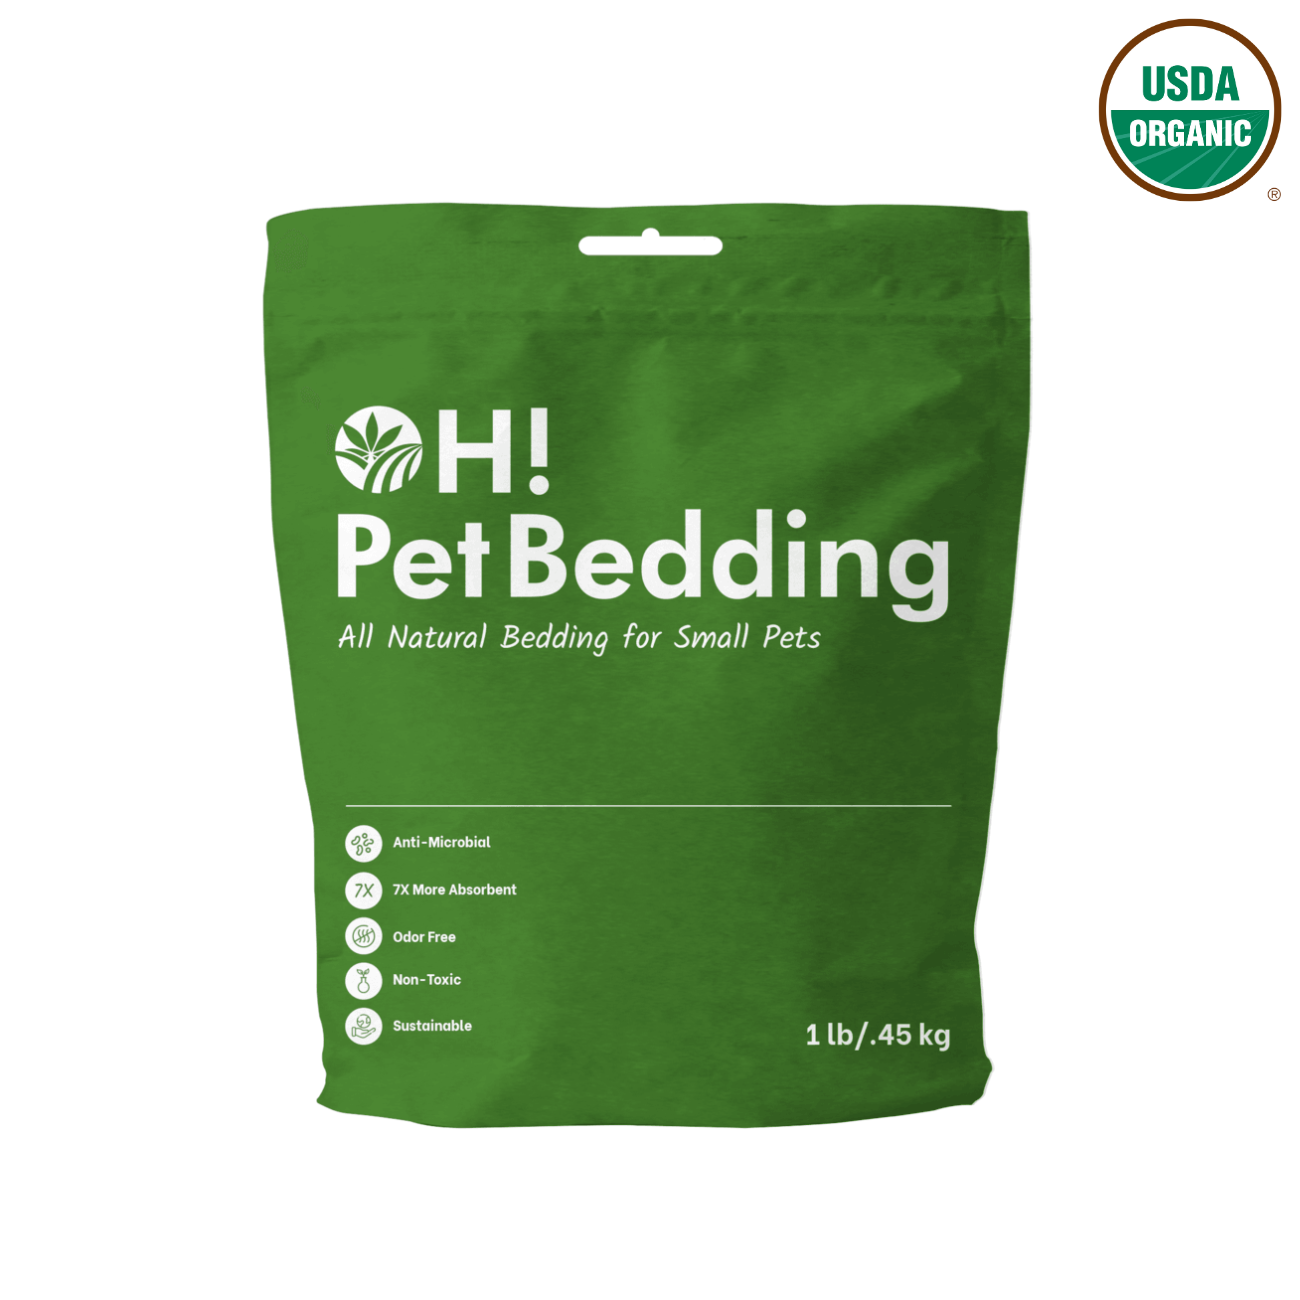 All-Natural Pet Bedding made from USDA organic hemp - Oley Health and Wellness